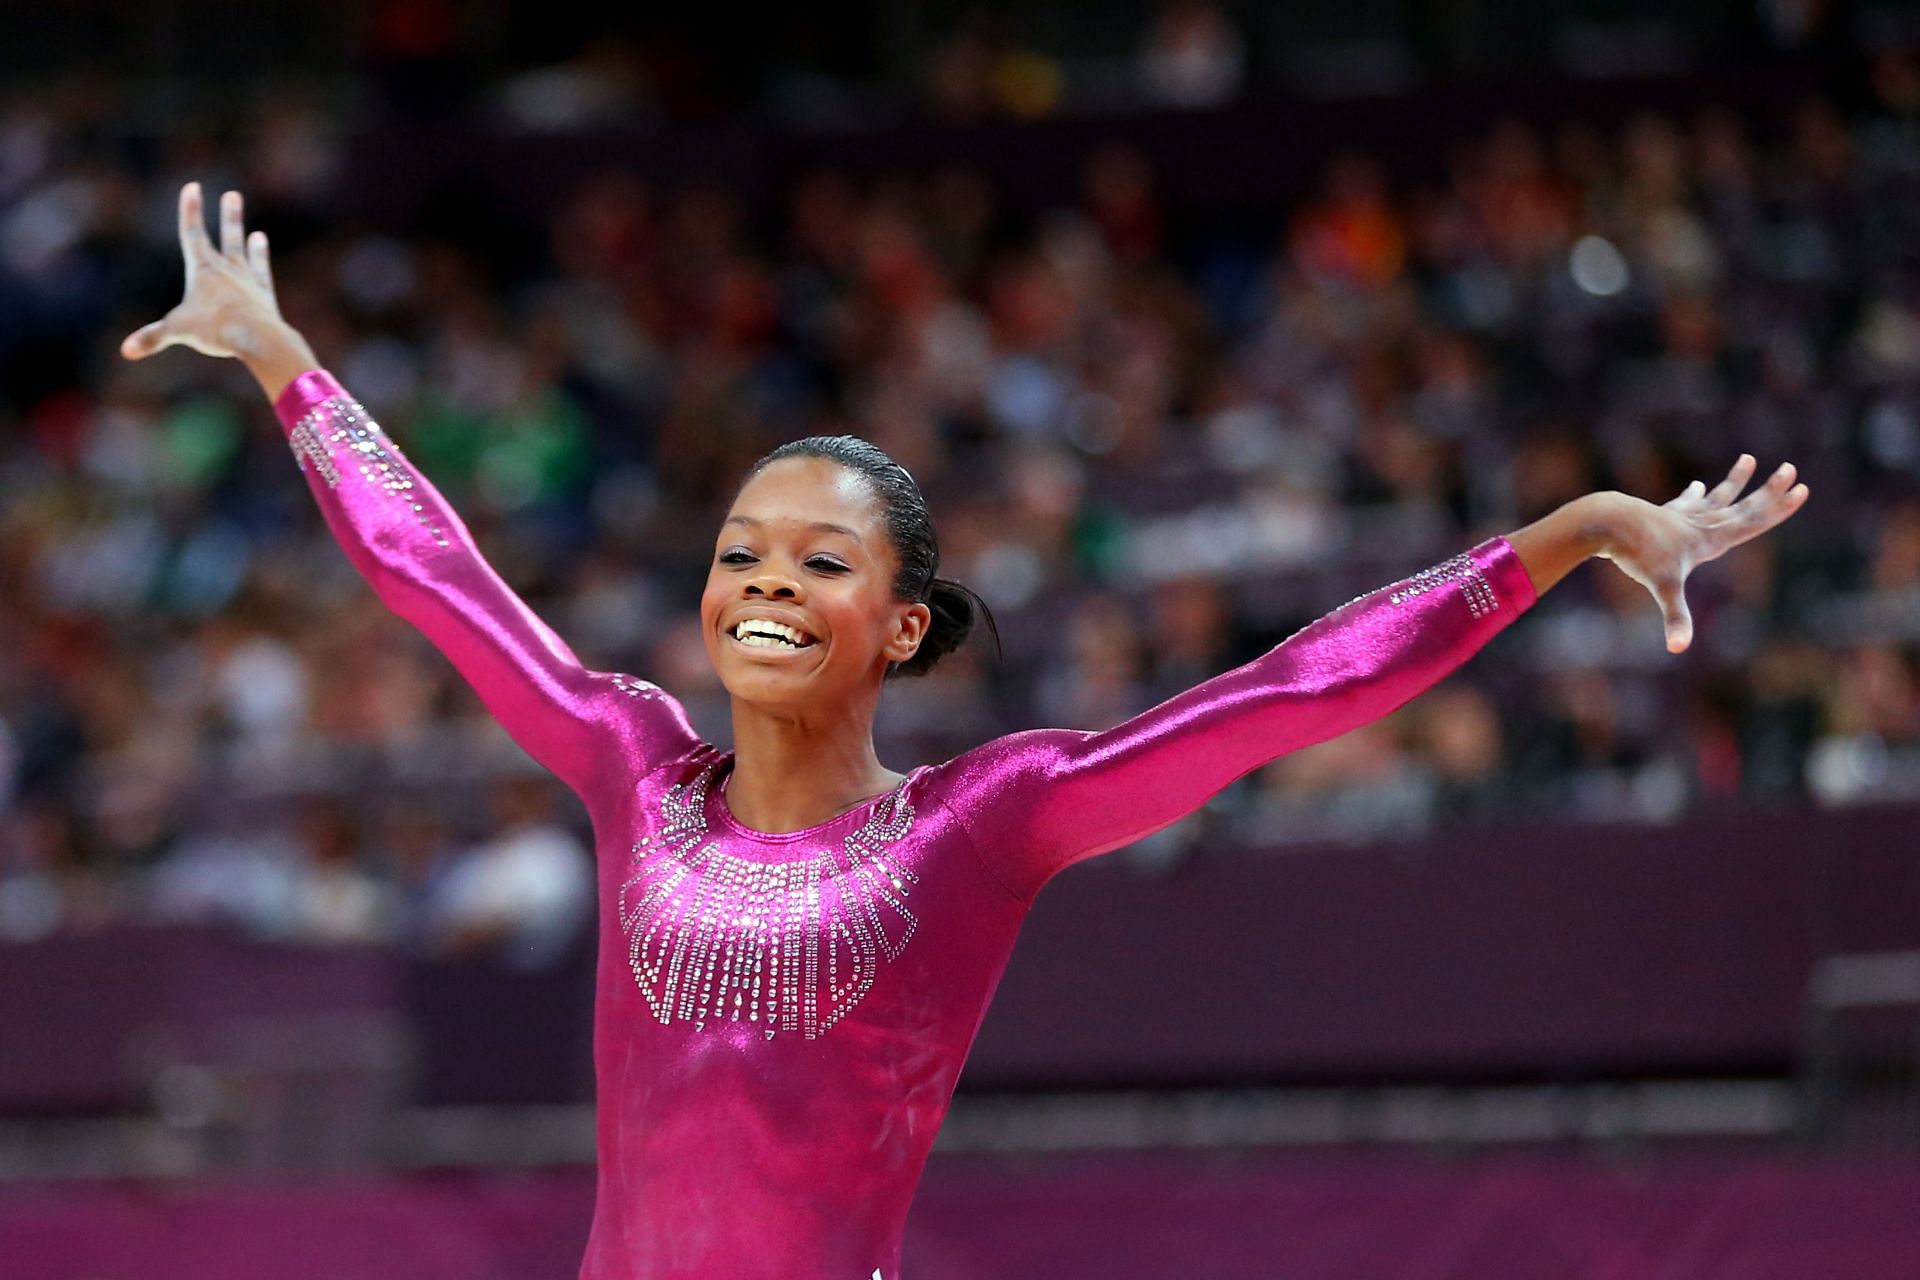 Gabrielle Douglas at the London 2012 Olympics. (Photo by Streeter Lecka/Getty Images)